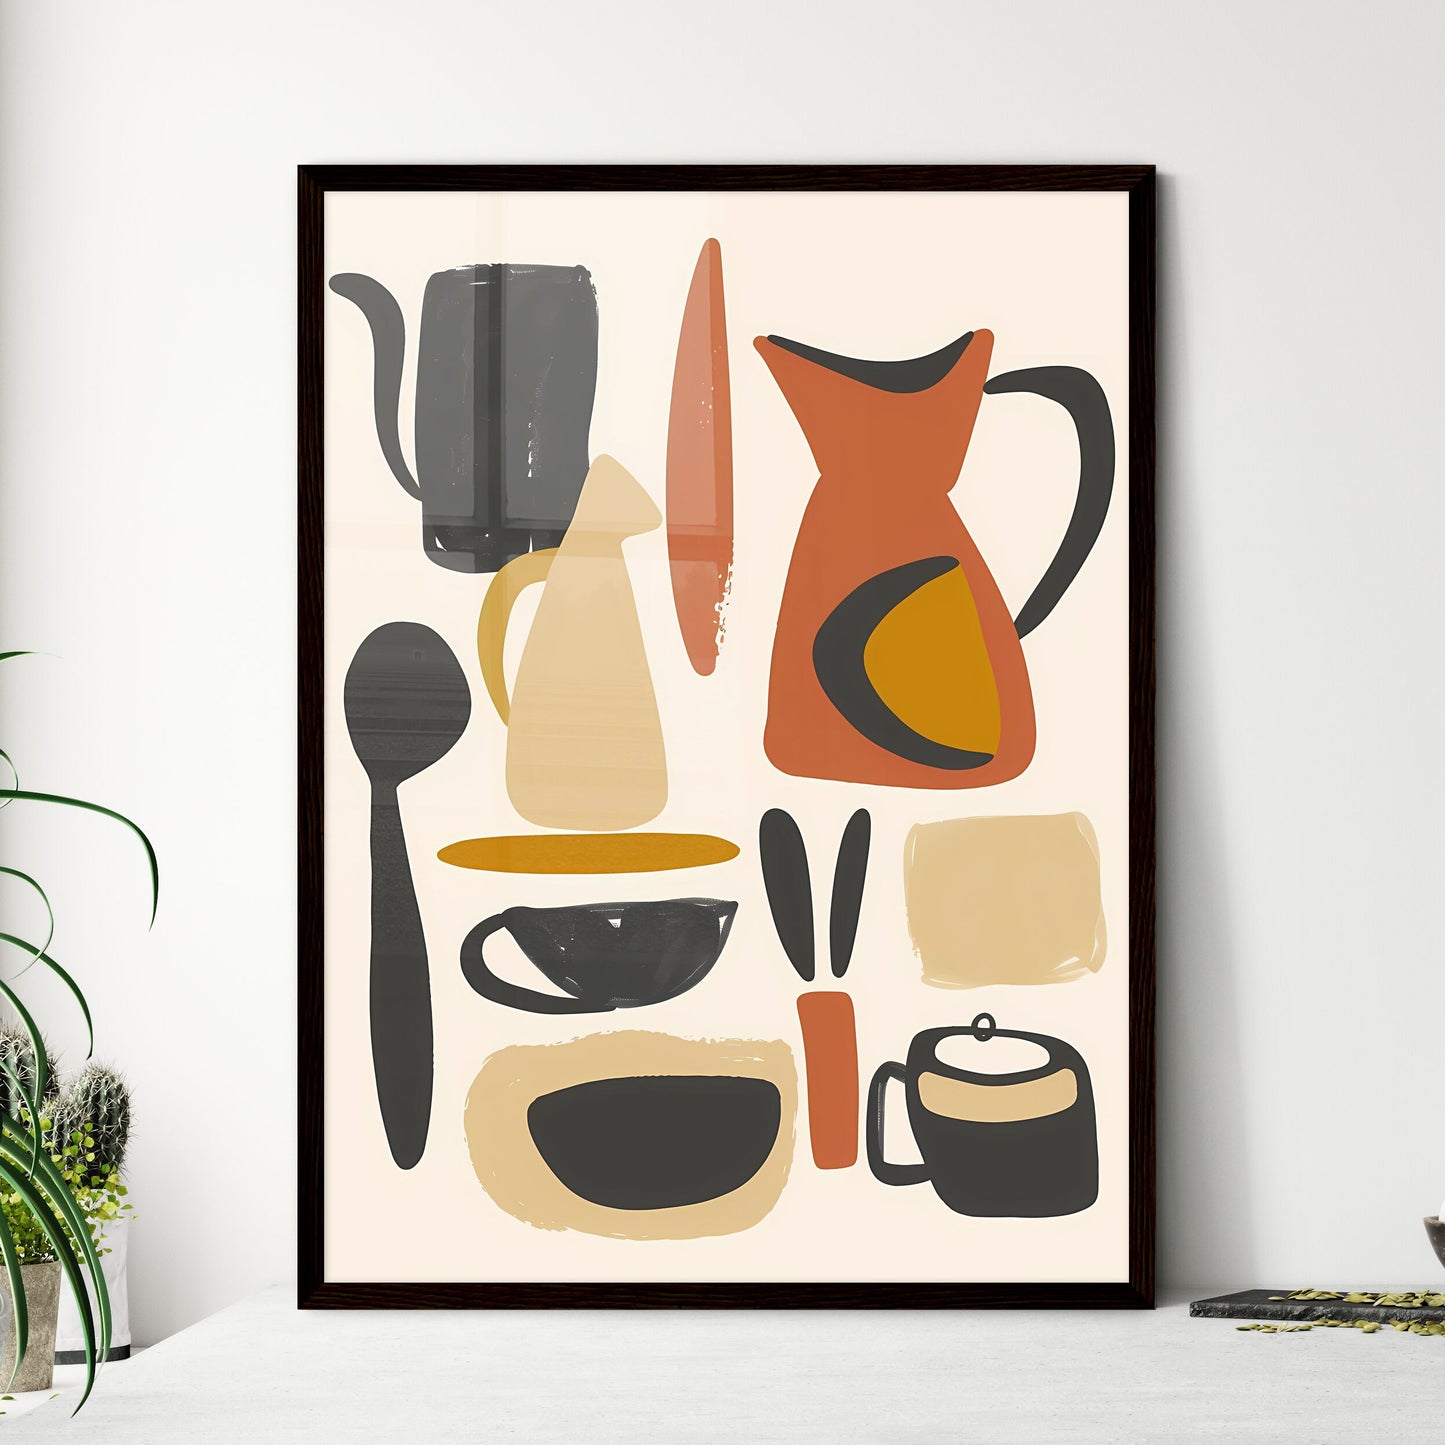 Hand Drawn Gouache Painting of Kitchen Utensils in Matisse Style with Soft Earthy Colors and Simple Minimalist Design Default Title